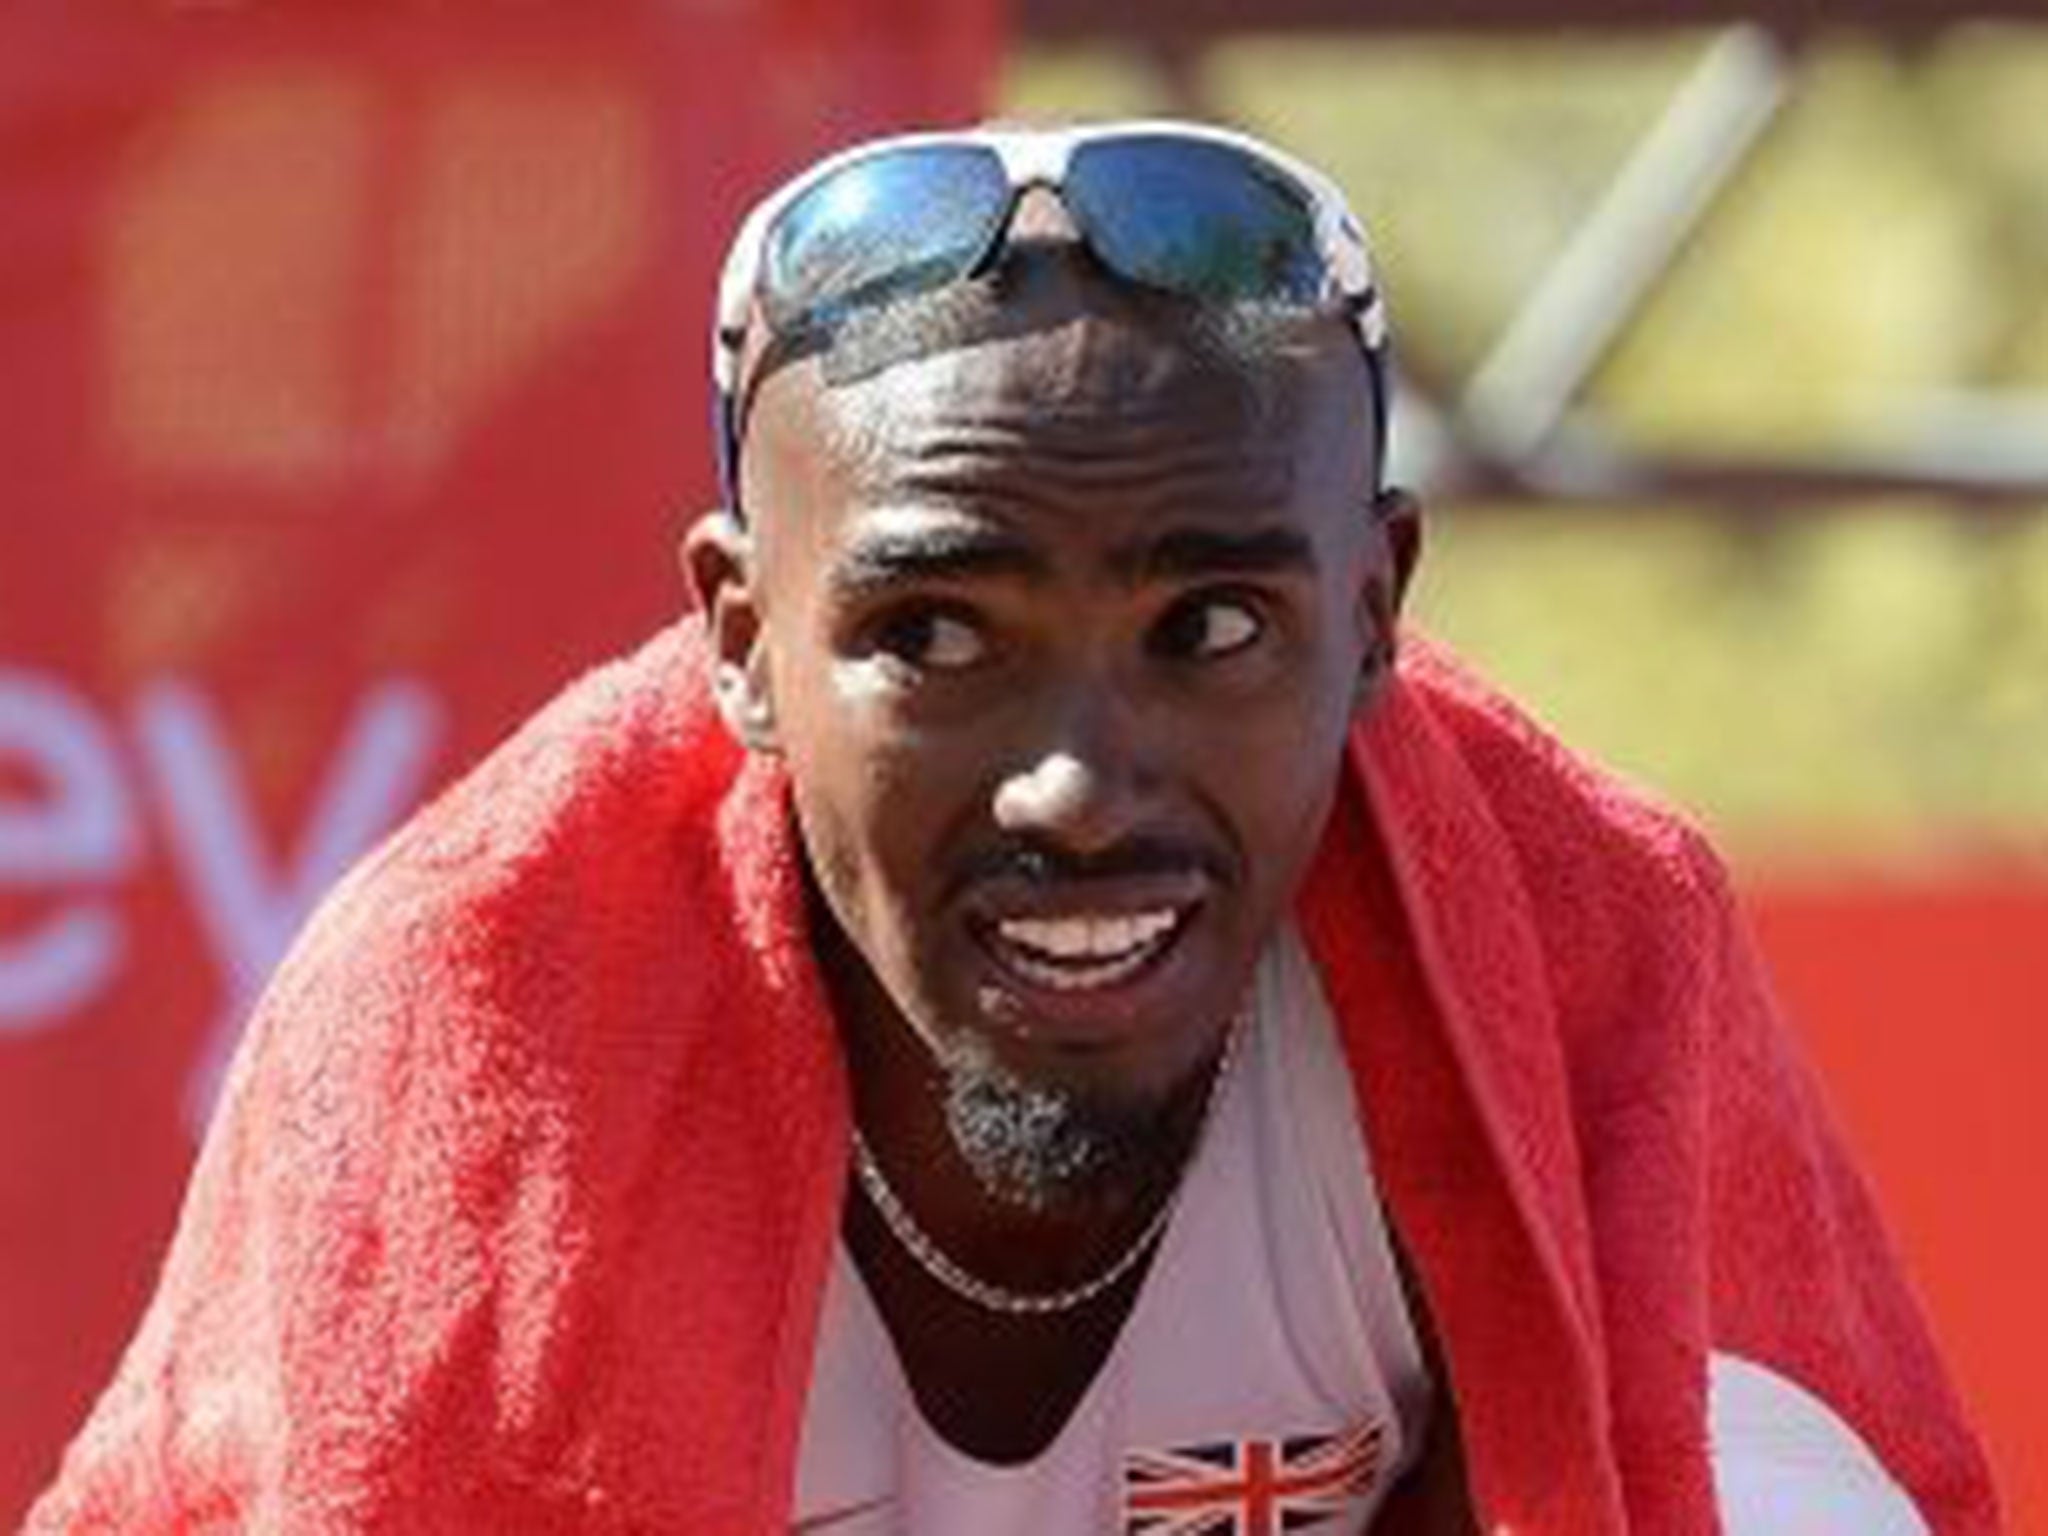 Mo Farah prepares to race at the Diamond League meeting this weekend